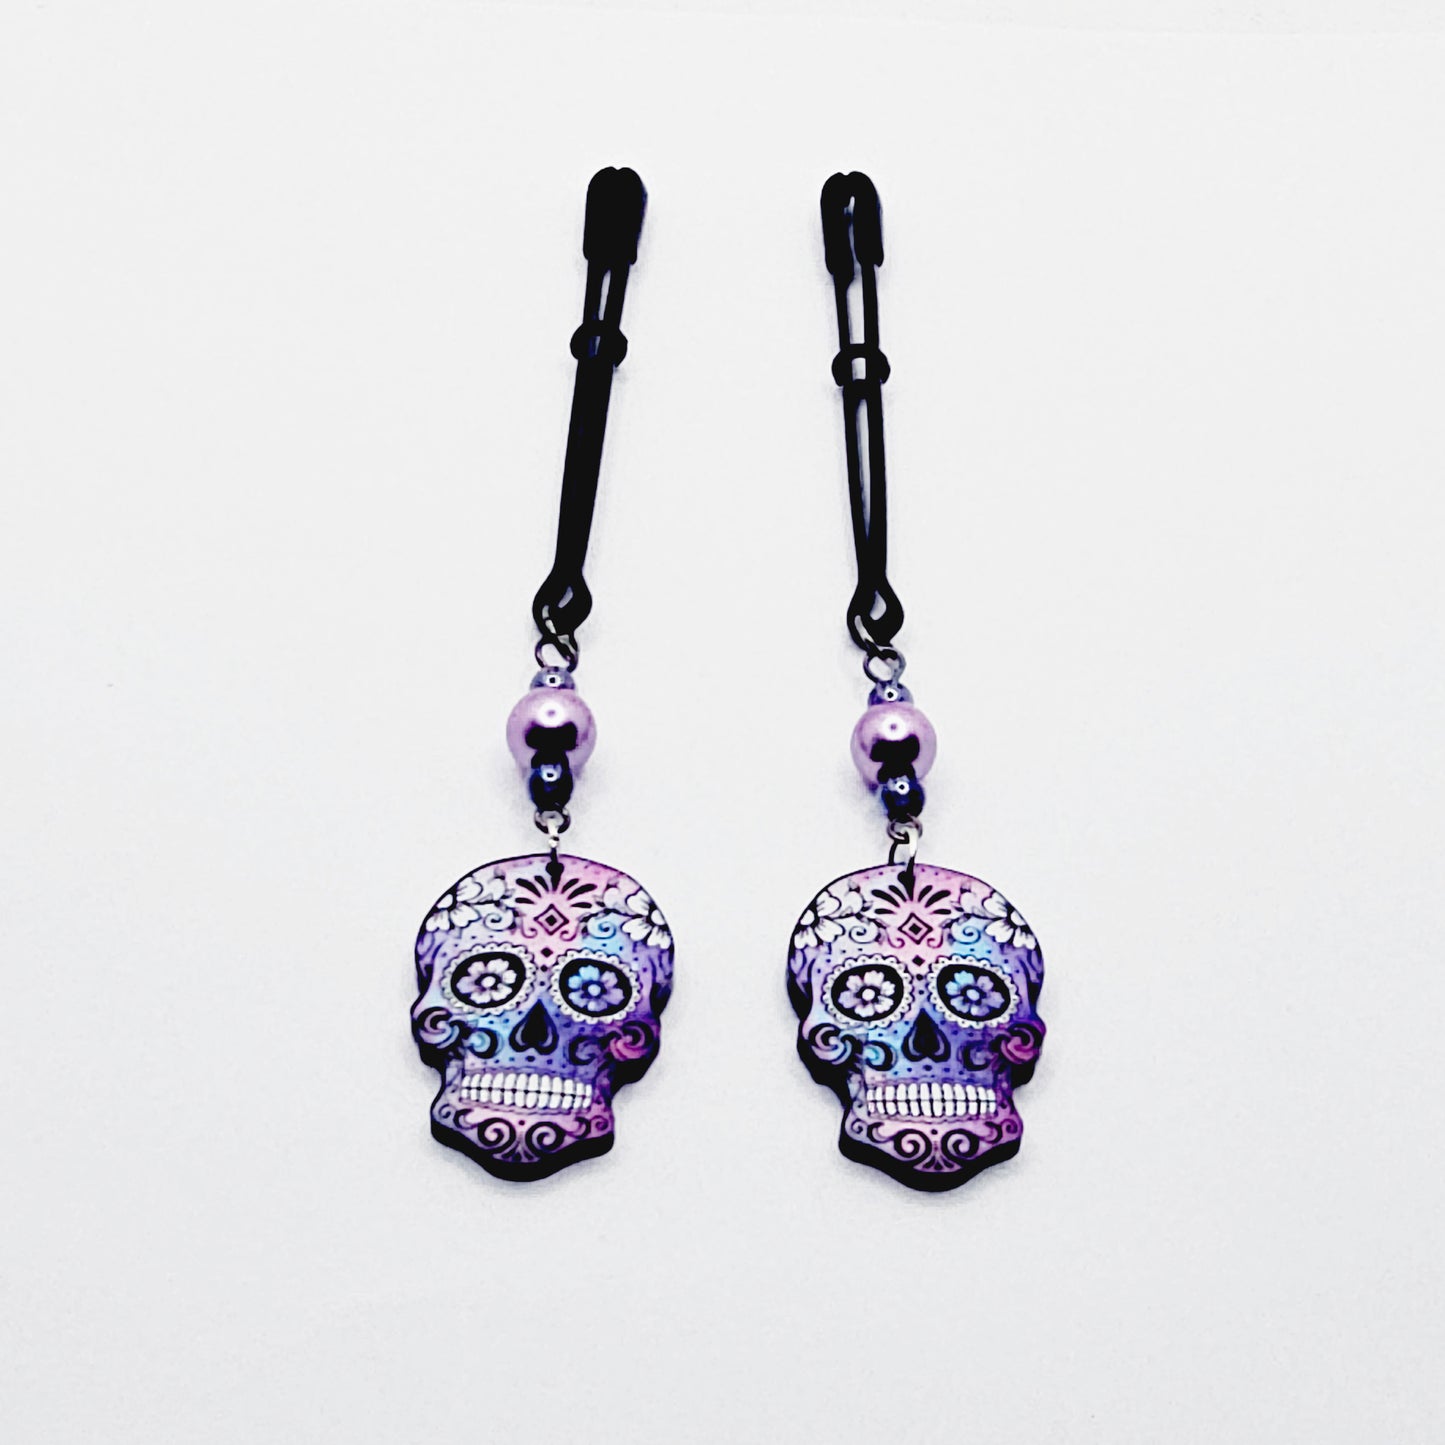 Sugar Skull Nipple Clamps. Black Tweezer Nipple Clamps with Pretty Pearl Beads and Skulls.